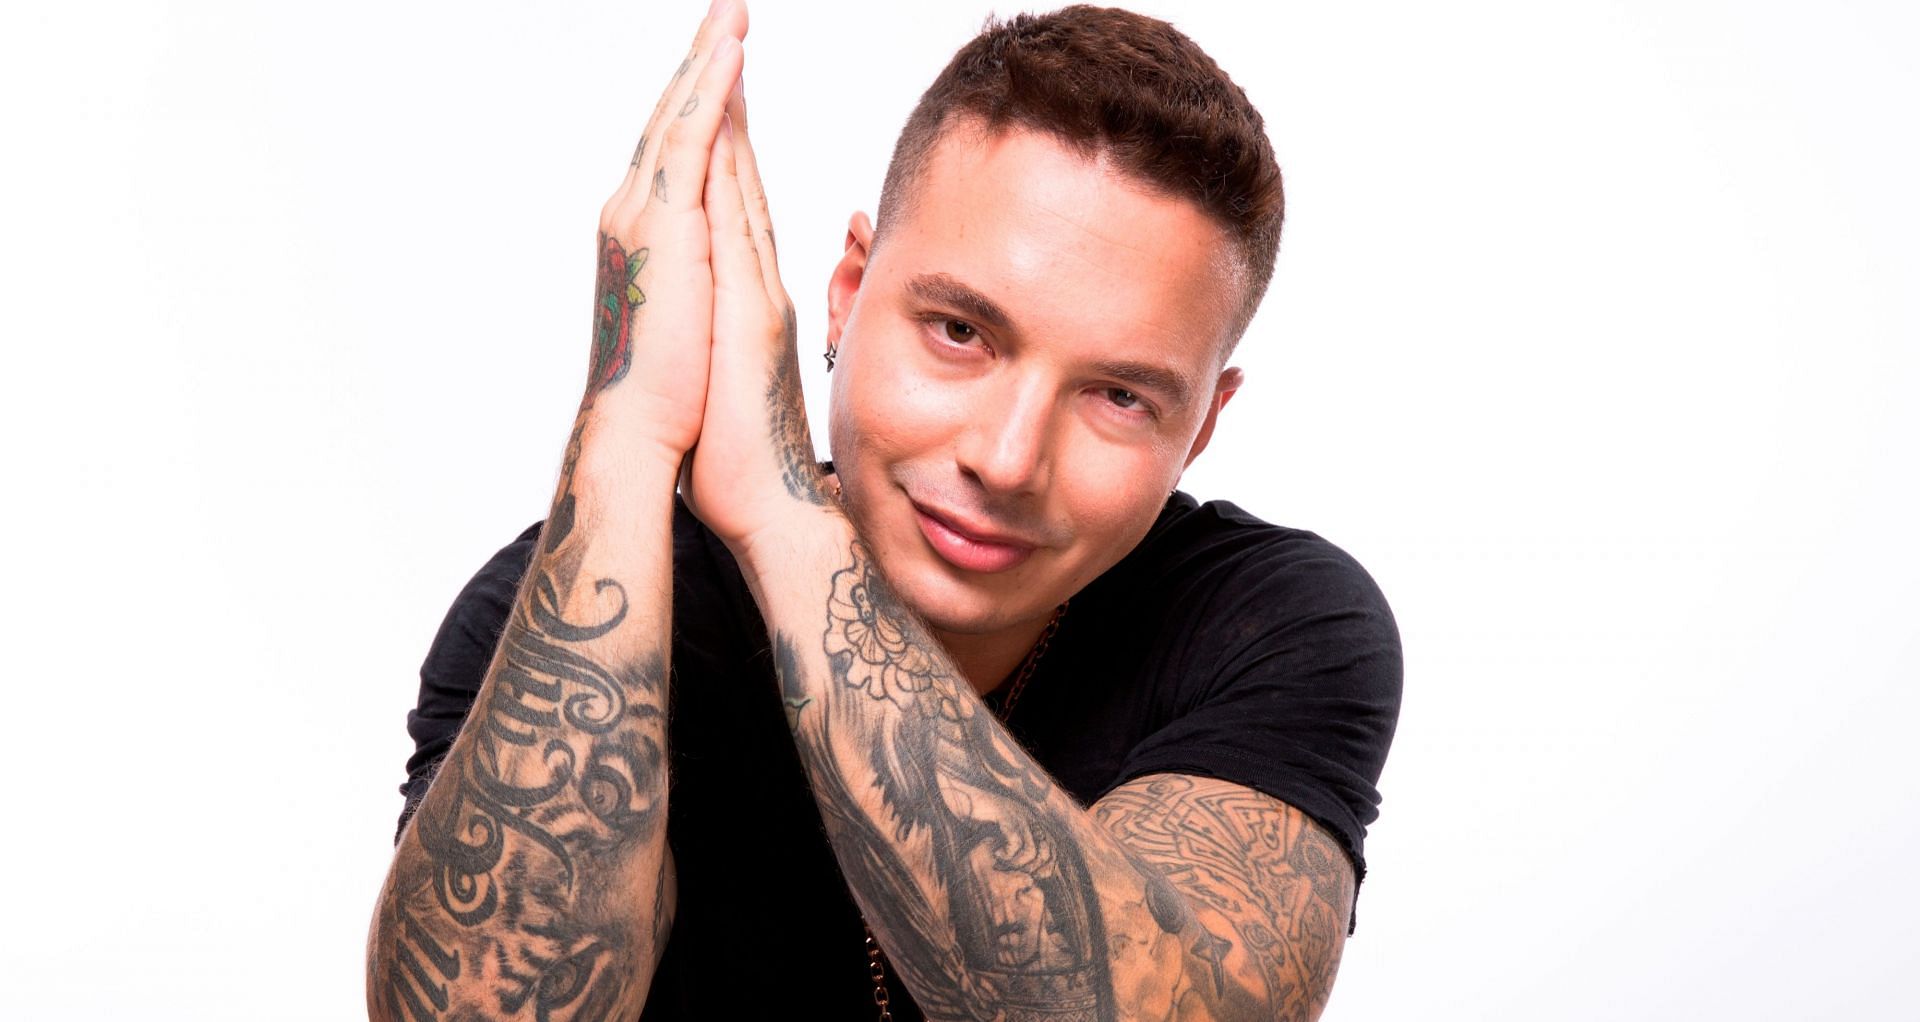 J Balvin has faced severe backlash for &quot;Perra&quot; music video (Image via Getty Images)